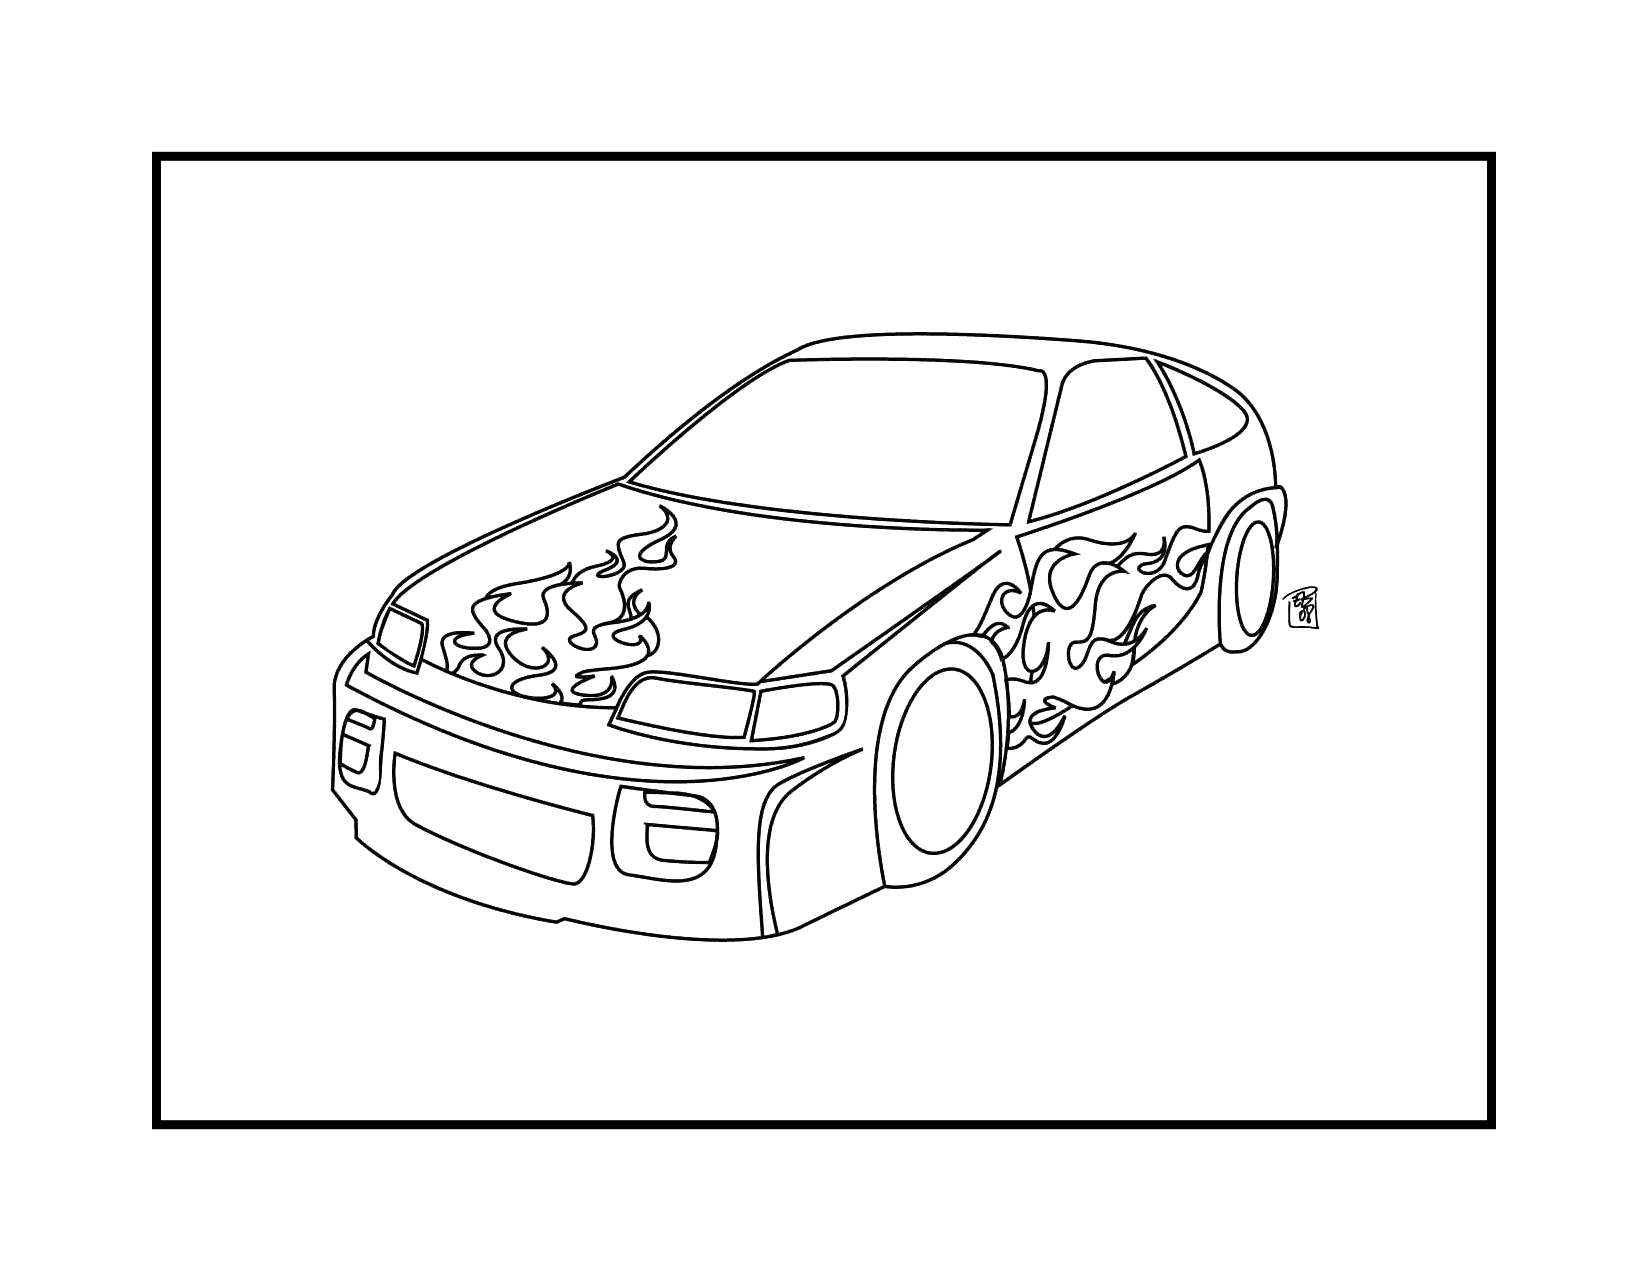 Race Car With Flames Coloring Page